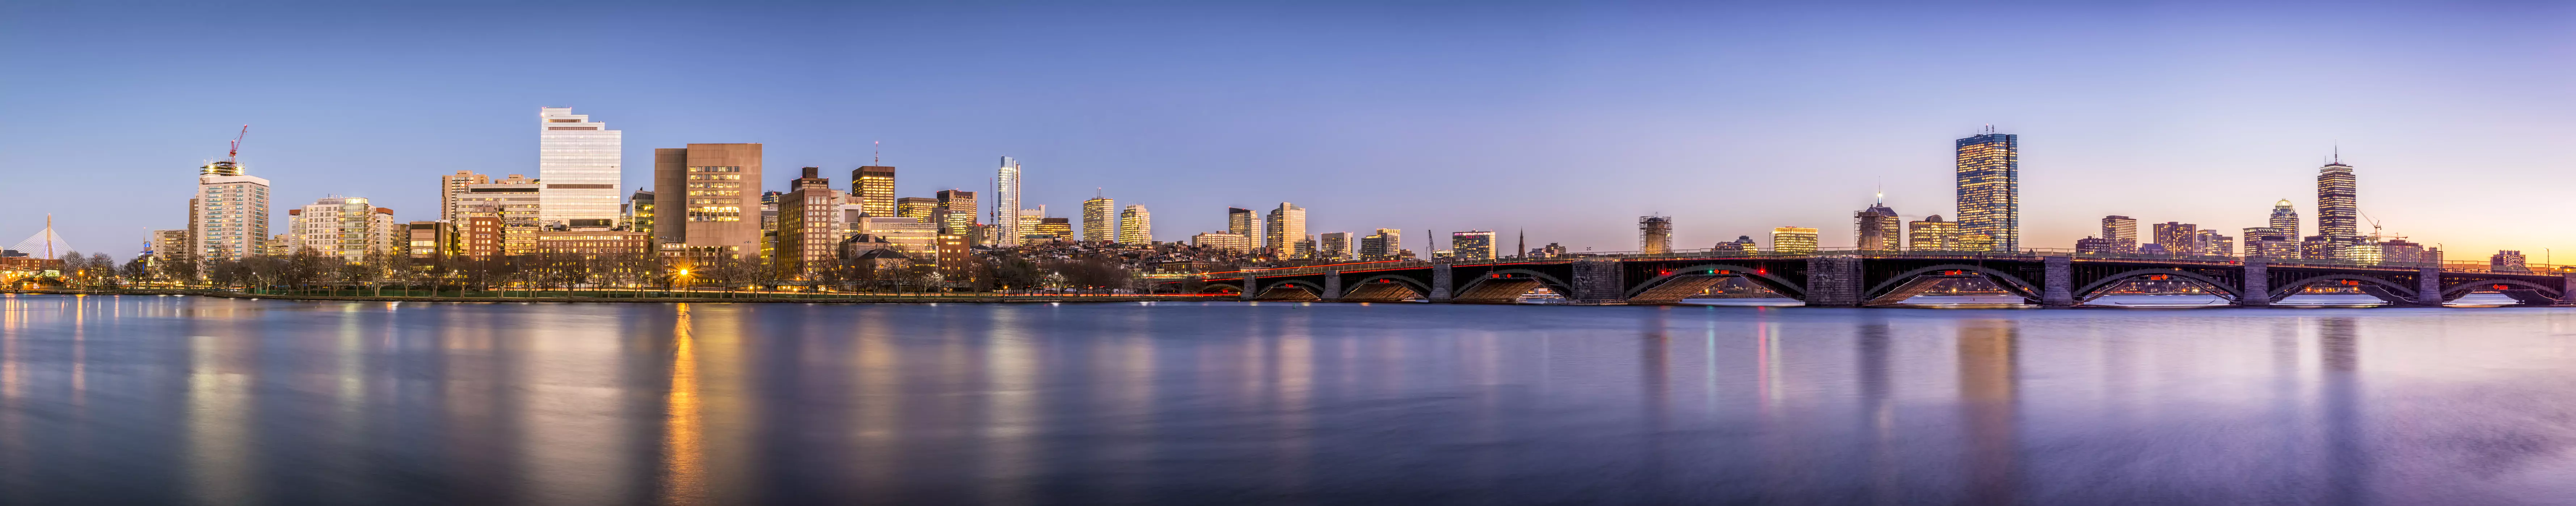 Header image for Beacon Hill Village showing the beautiful Boston skyline